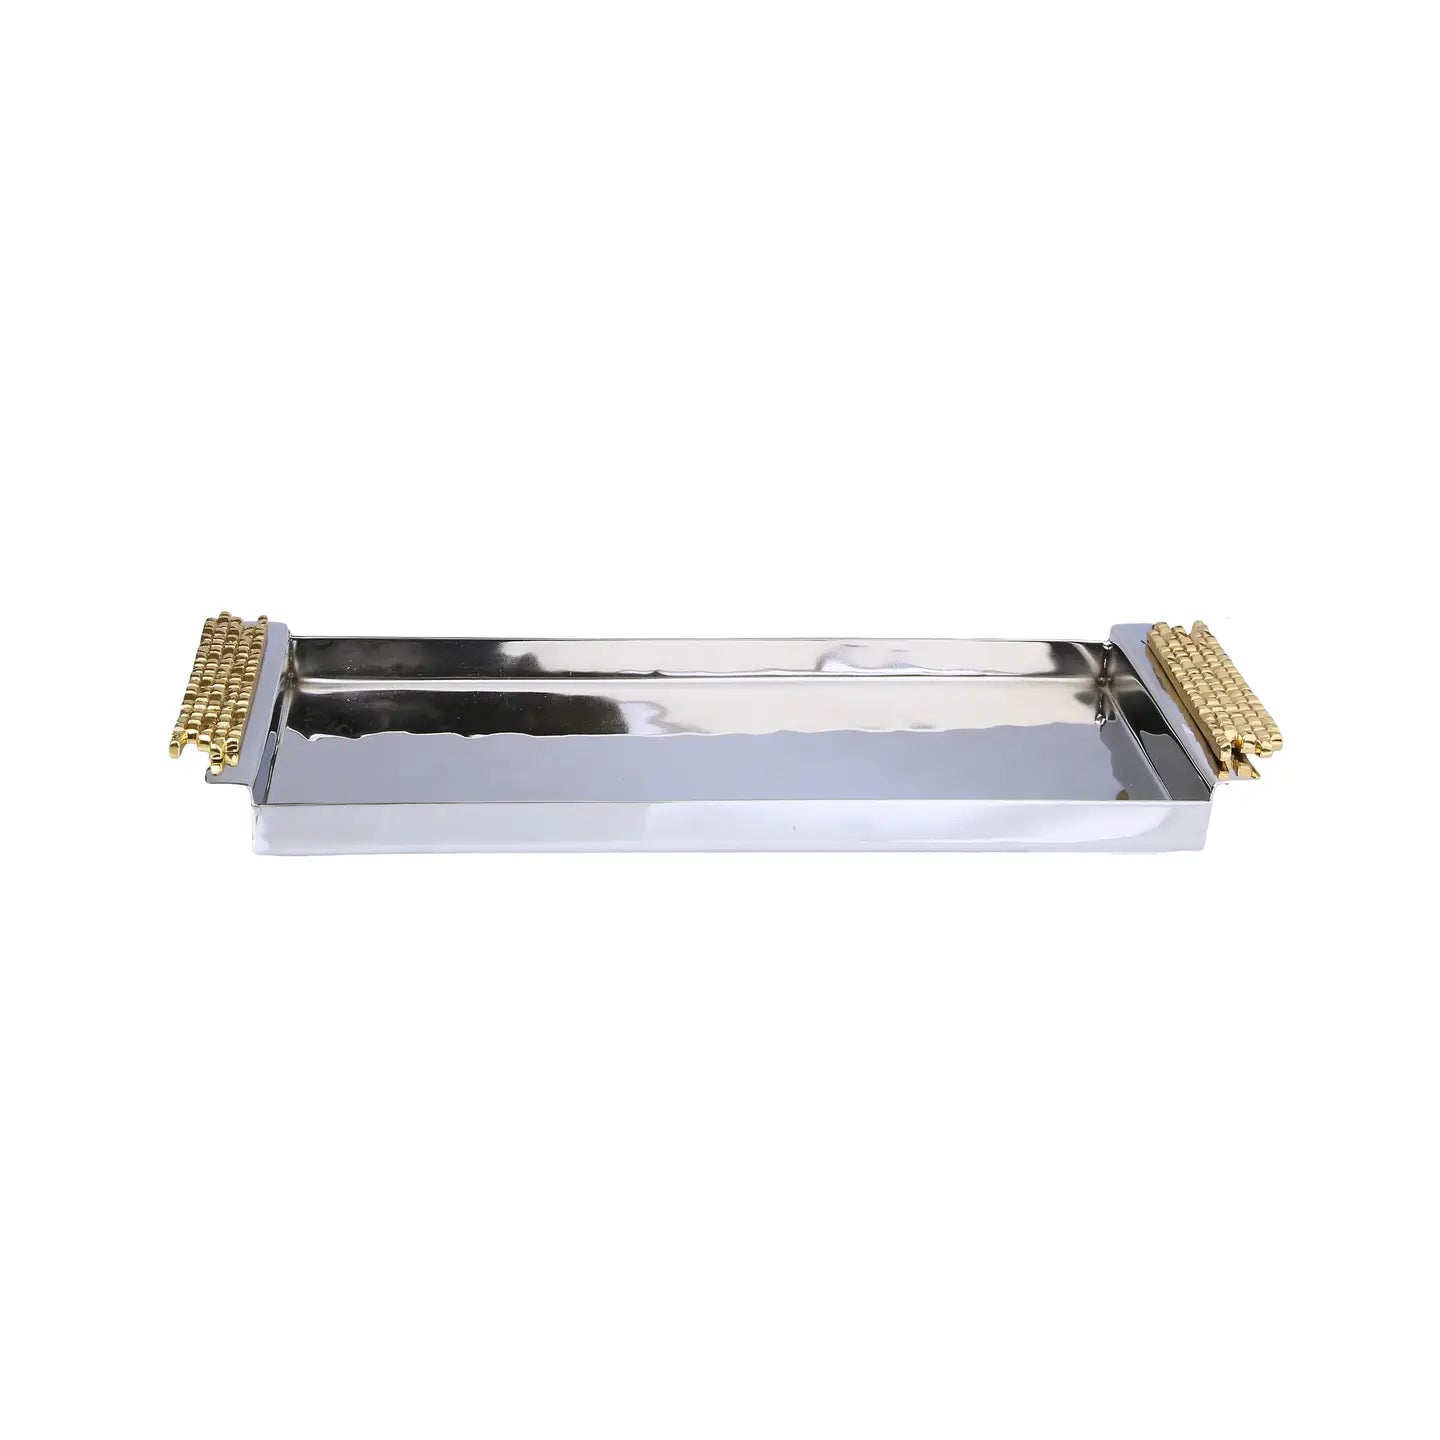 Rectangular Tray Mosaic Handles - Gold/ Nickel Decorative Trays High Class Touch - Home Decor 